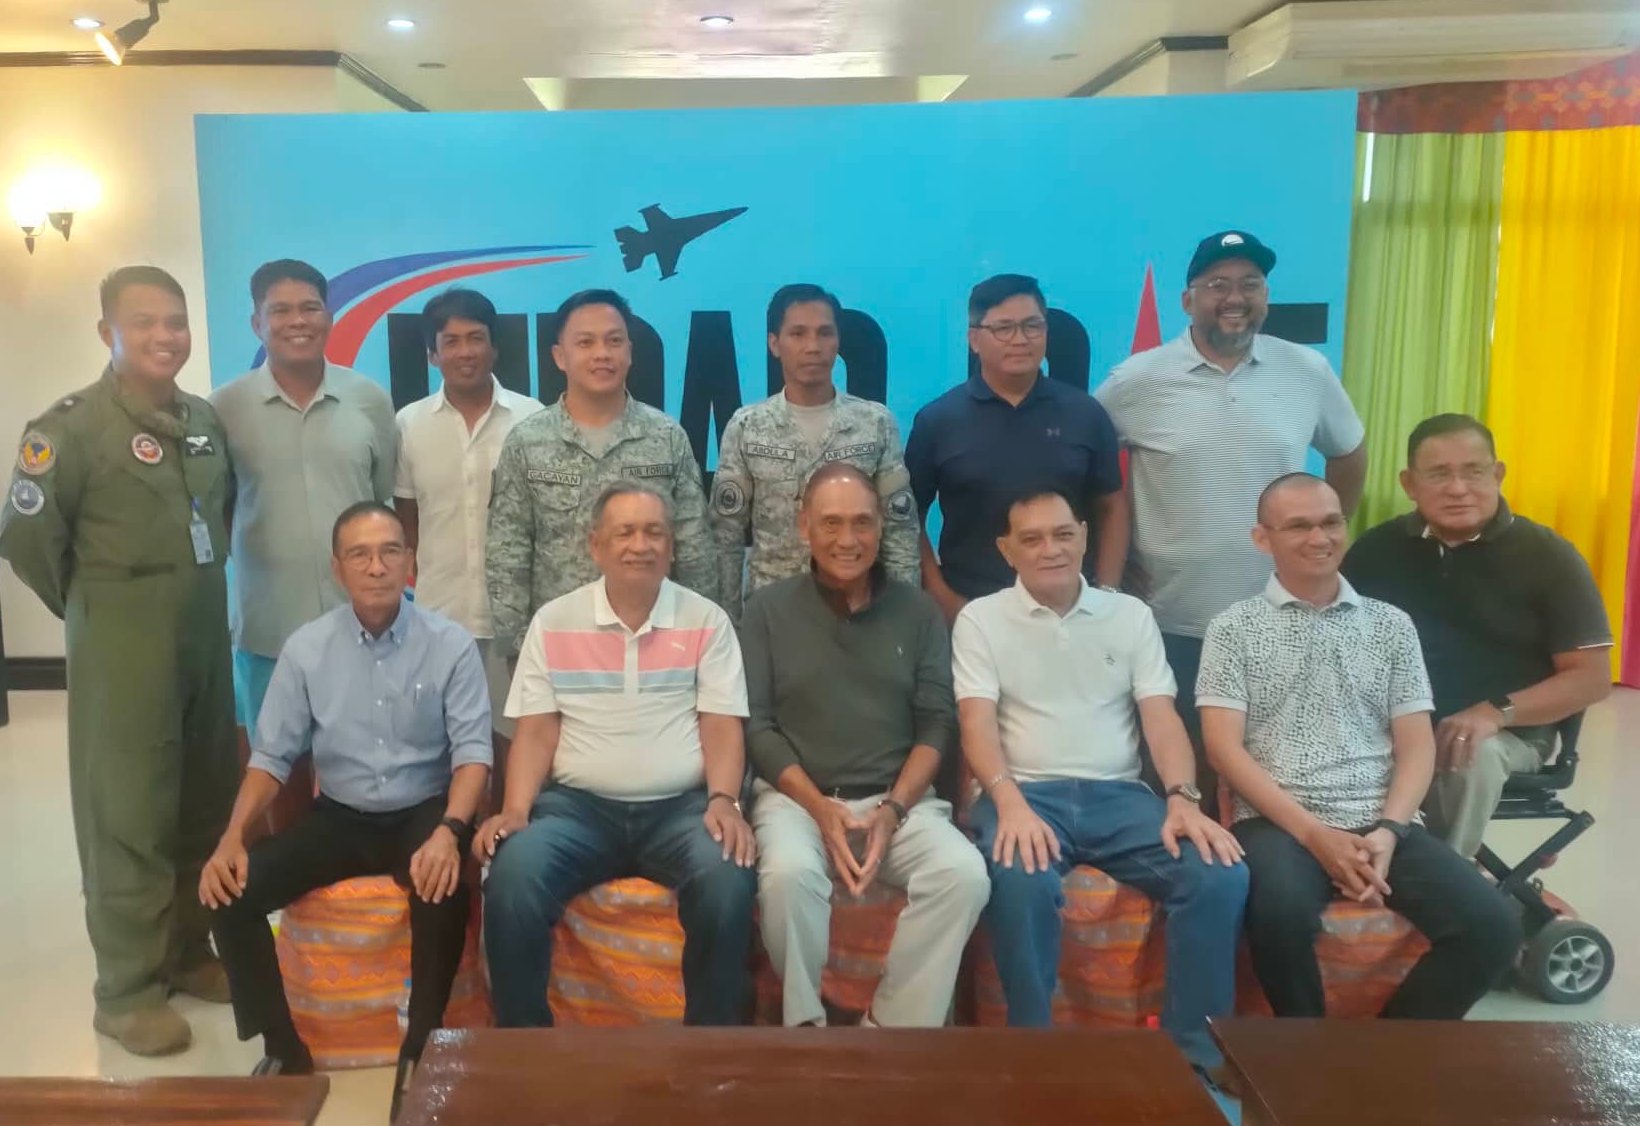 Tommy Manotoc (seated, center) and officials of the Edwin Andrews Air Base golf course in Zamboanga pose after the agreement launching a grassroots program among children of the military. Also in photo are (second from left, standing) Jessie Balasabas and Japan Tour regular Juvic Pagunsan. –